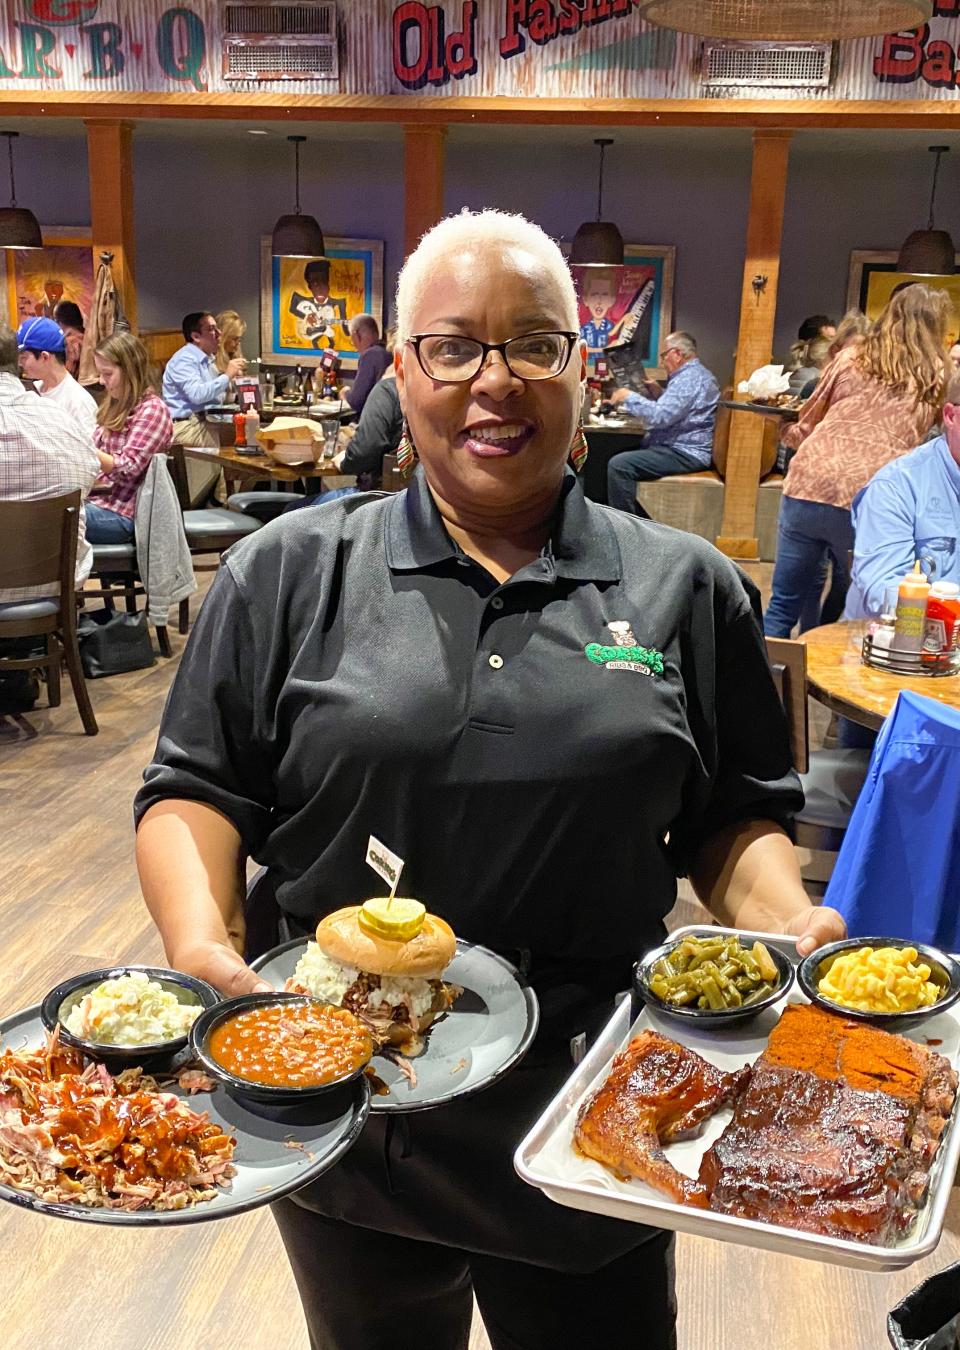 Anita McComb, a longtime server at Corky's, brings an order to a table at Corky's BBQ at 5259 Poplar Ave. in Memphis.